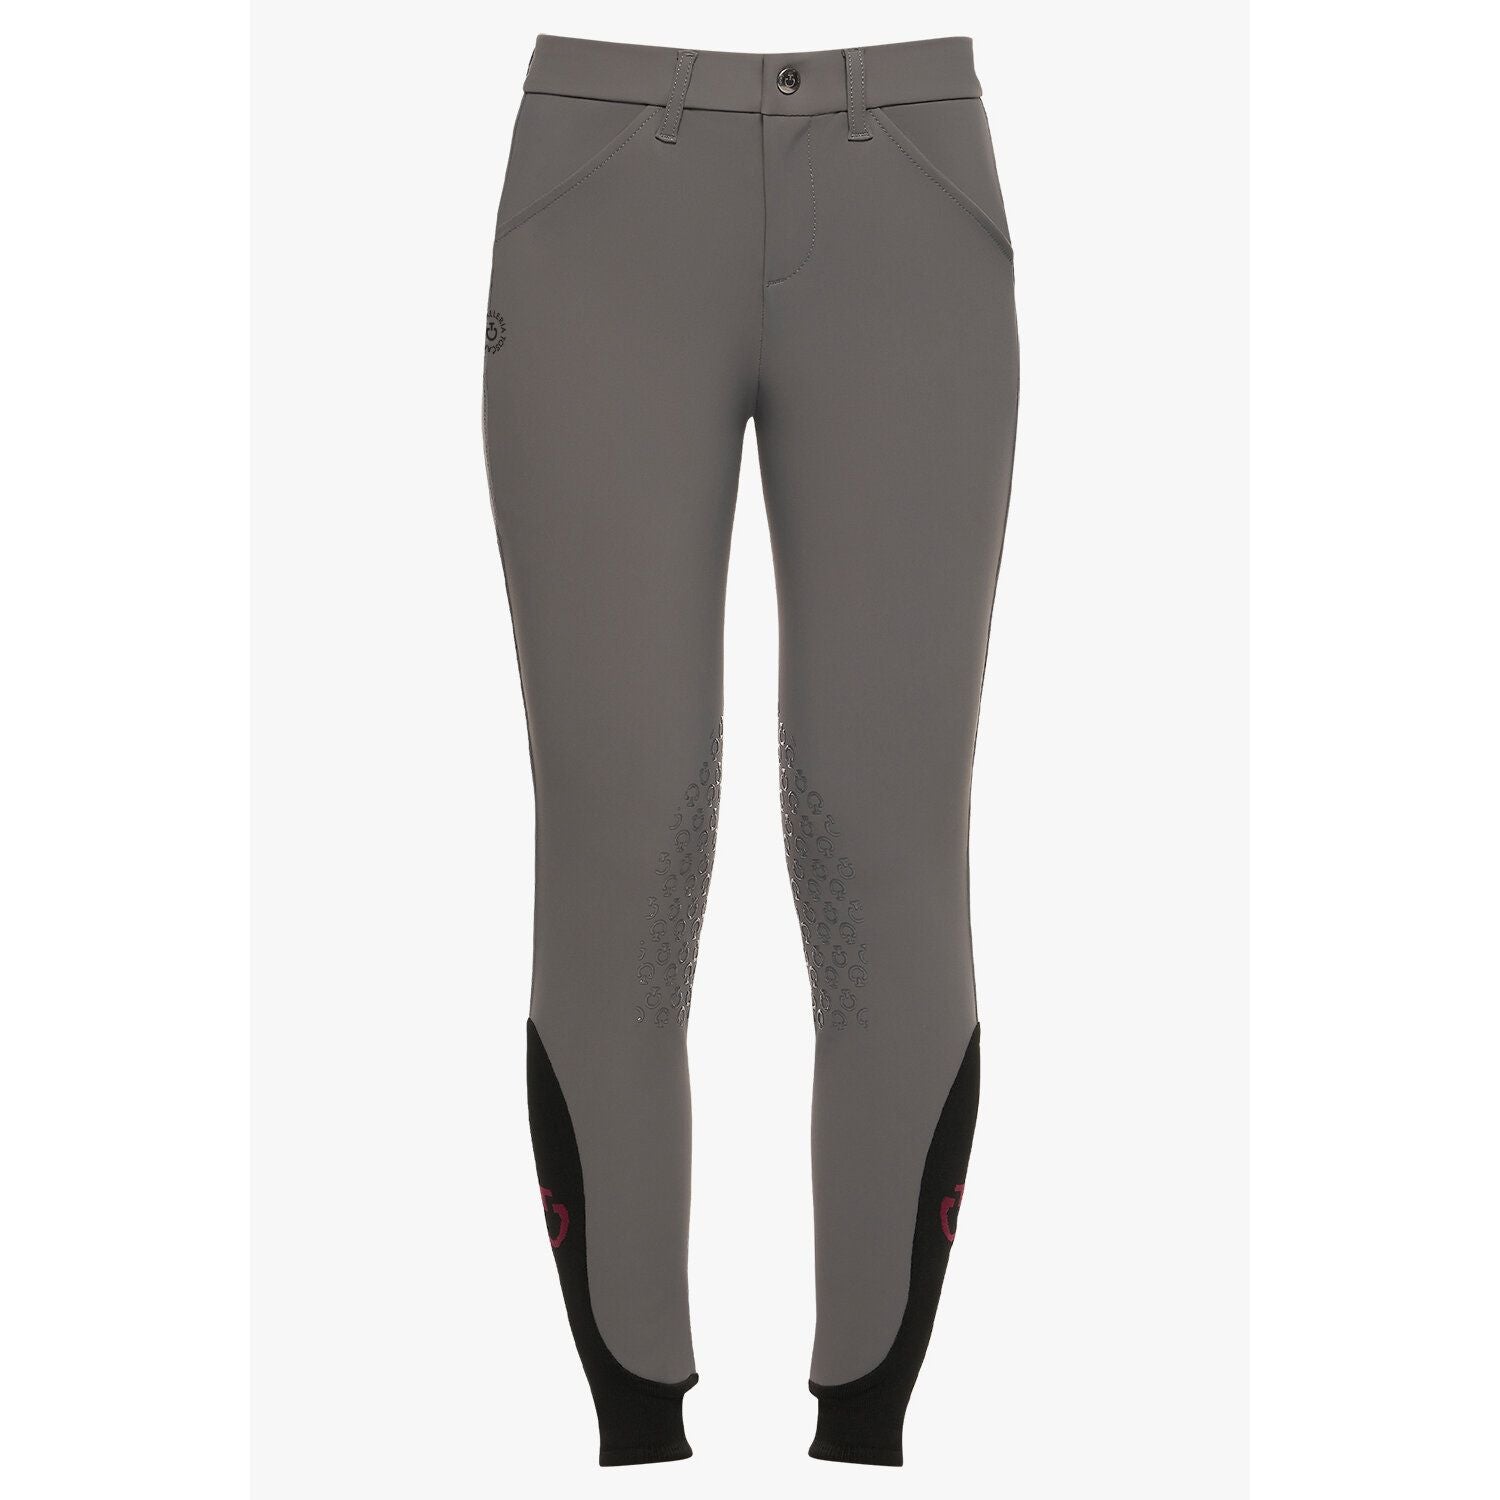 product shot image of the Young Rider Unisex CT Riding Breeches - Grey